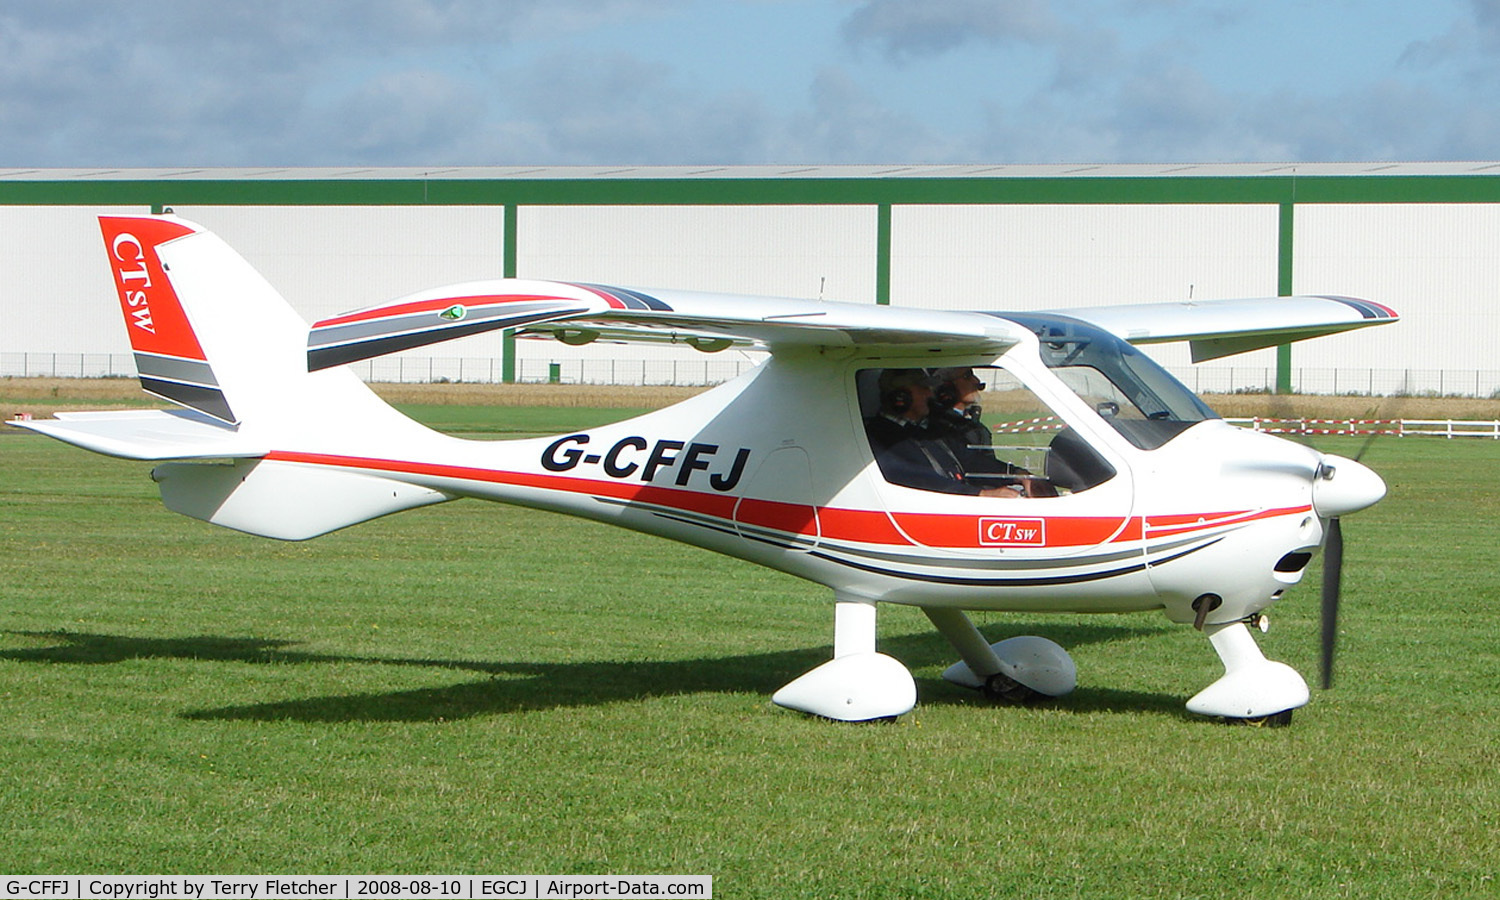 G-CFFJ, 2008 Flight Design CTSW C/N 8391, Visitor to the 2008 LAA Regional Fly-in at Sherburn